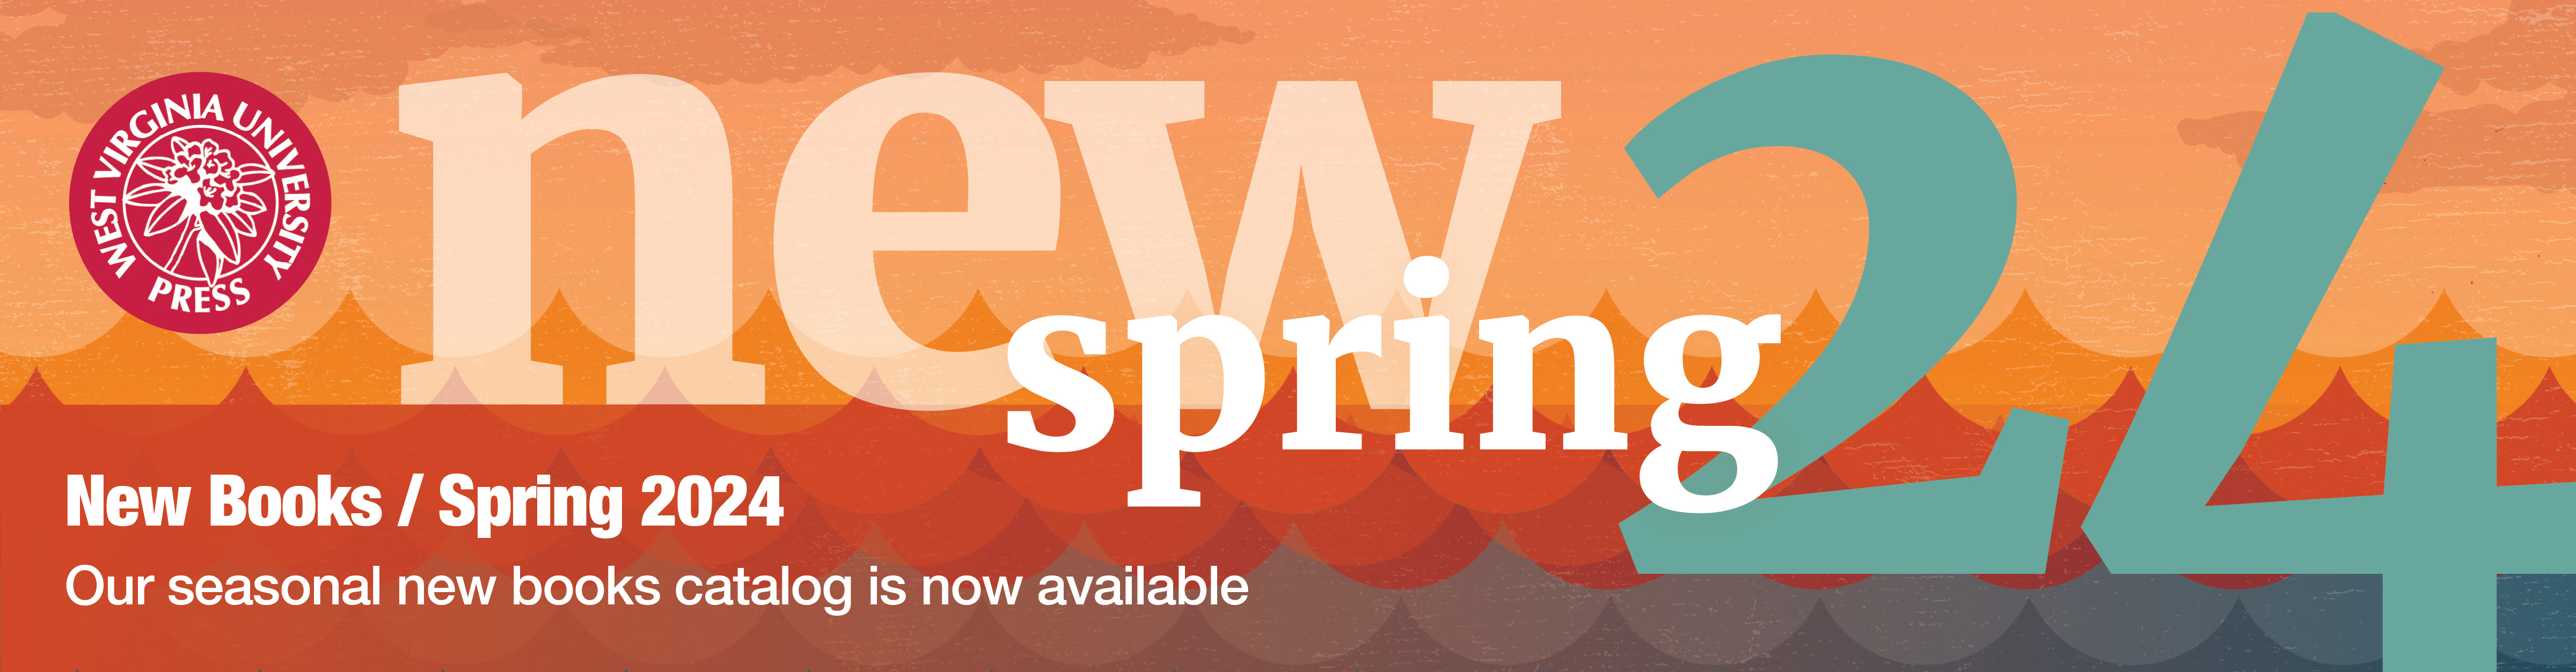 Orange and red banner announcing Spring 2024 new books